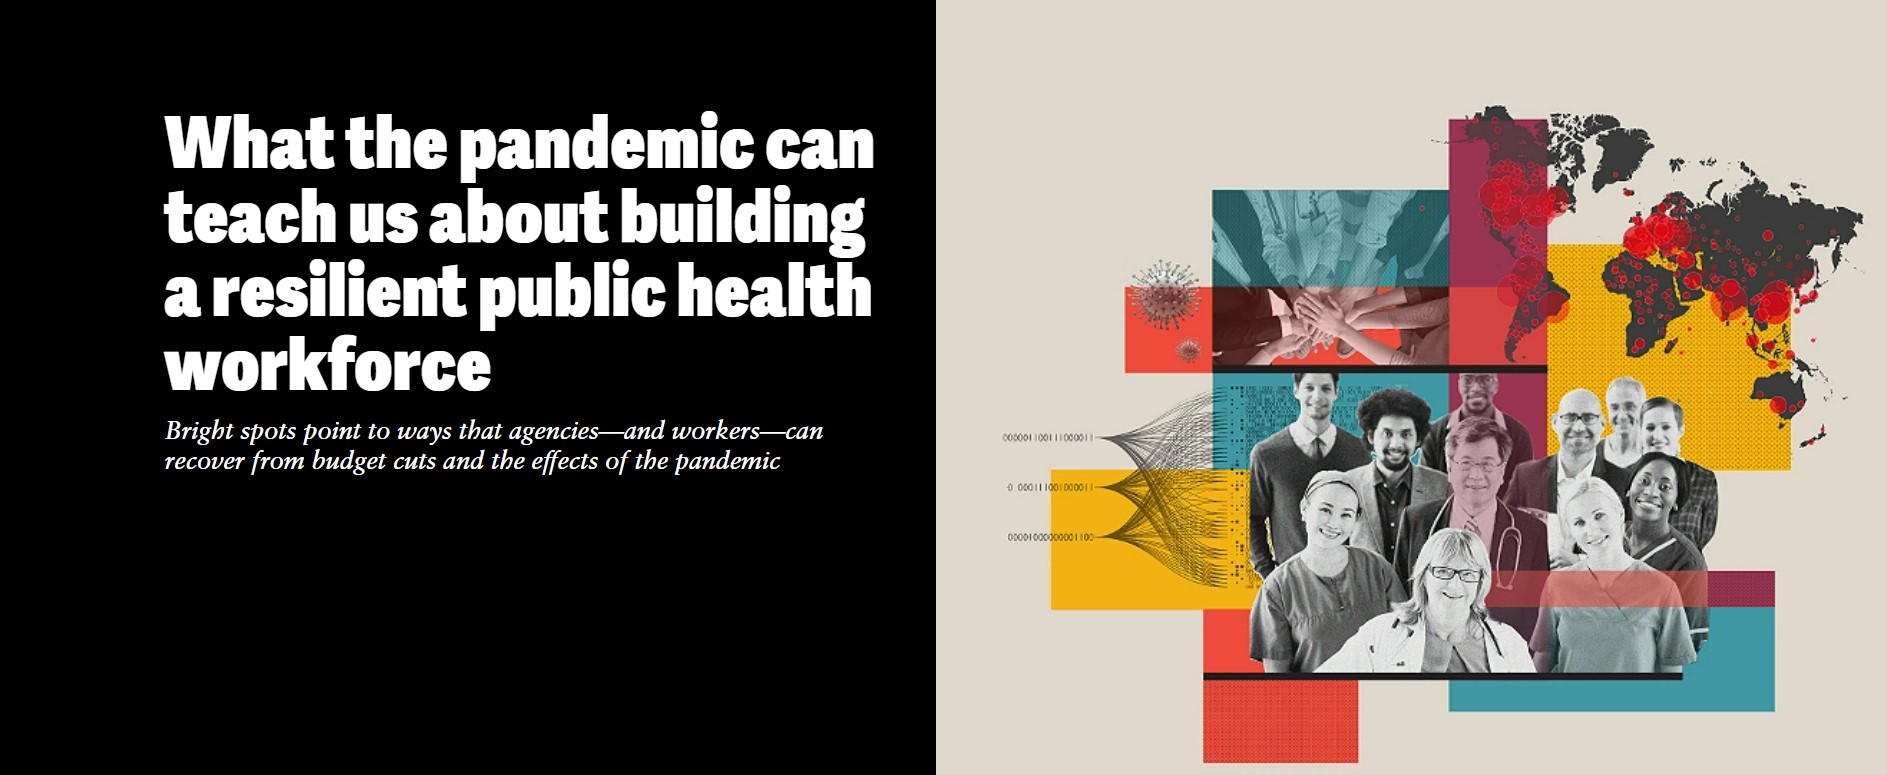 What the pandemic can teach us about building a resilient public health workforce